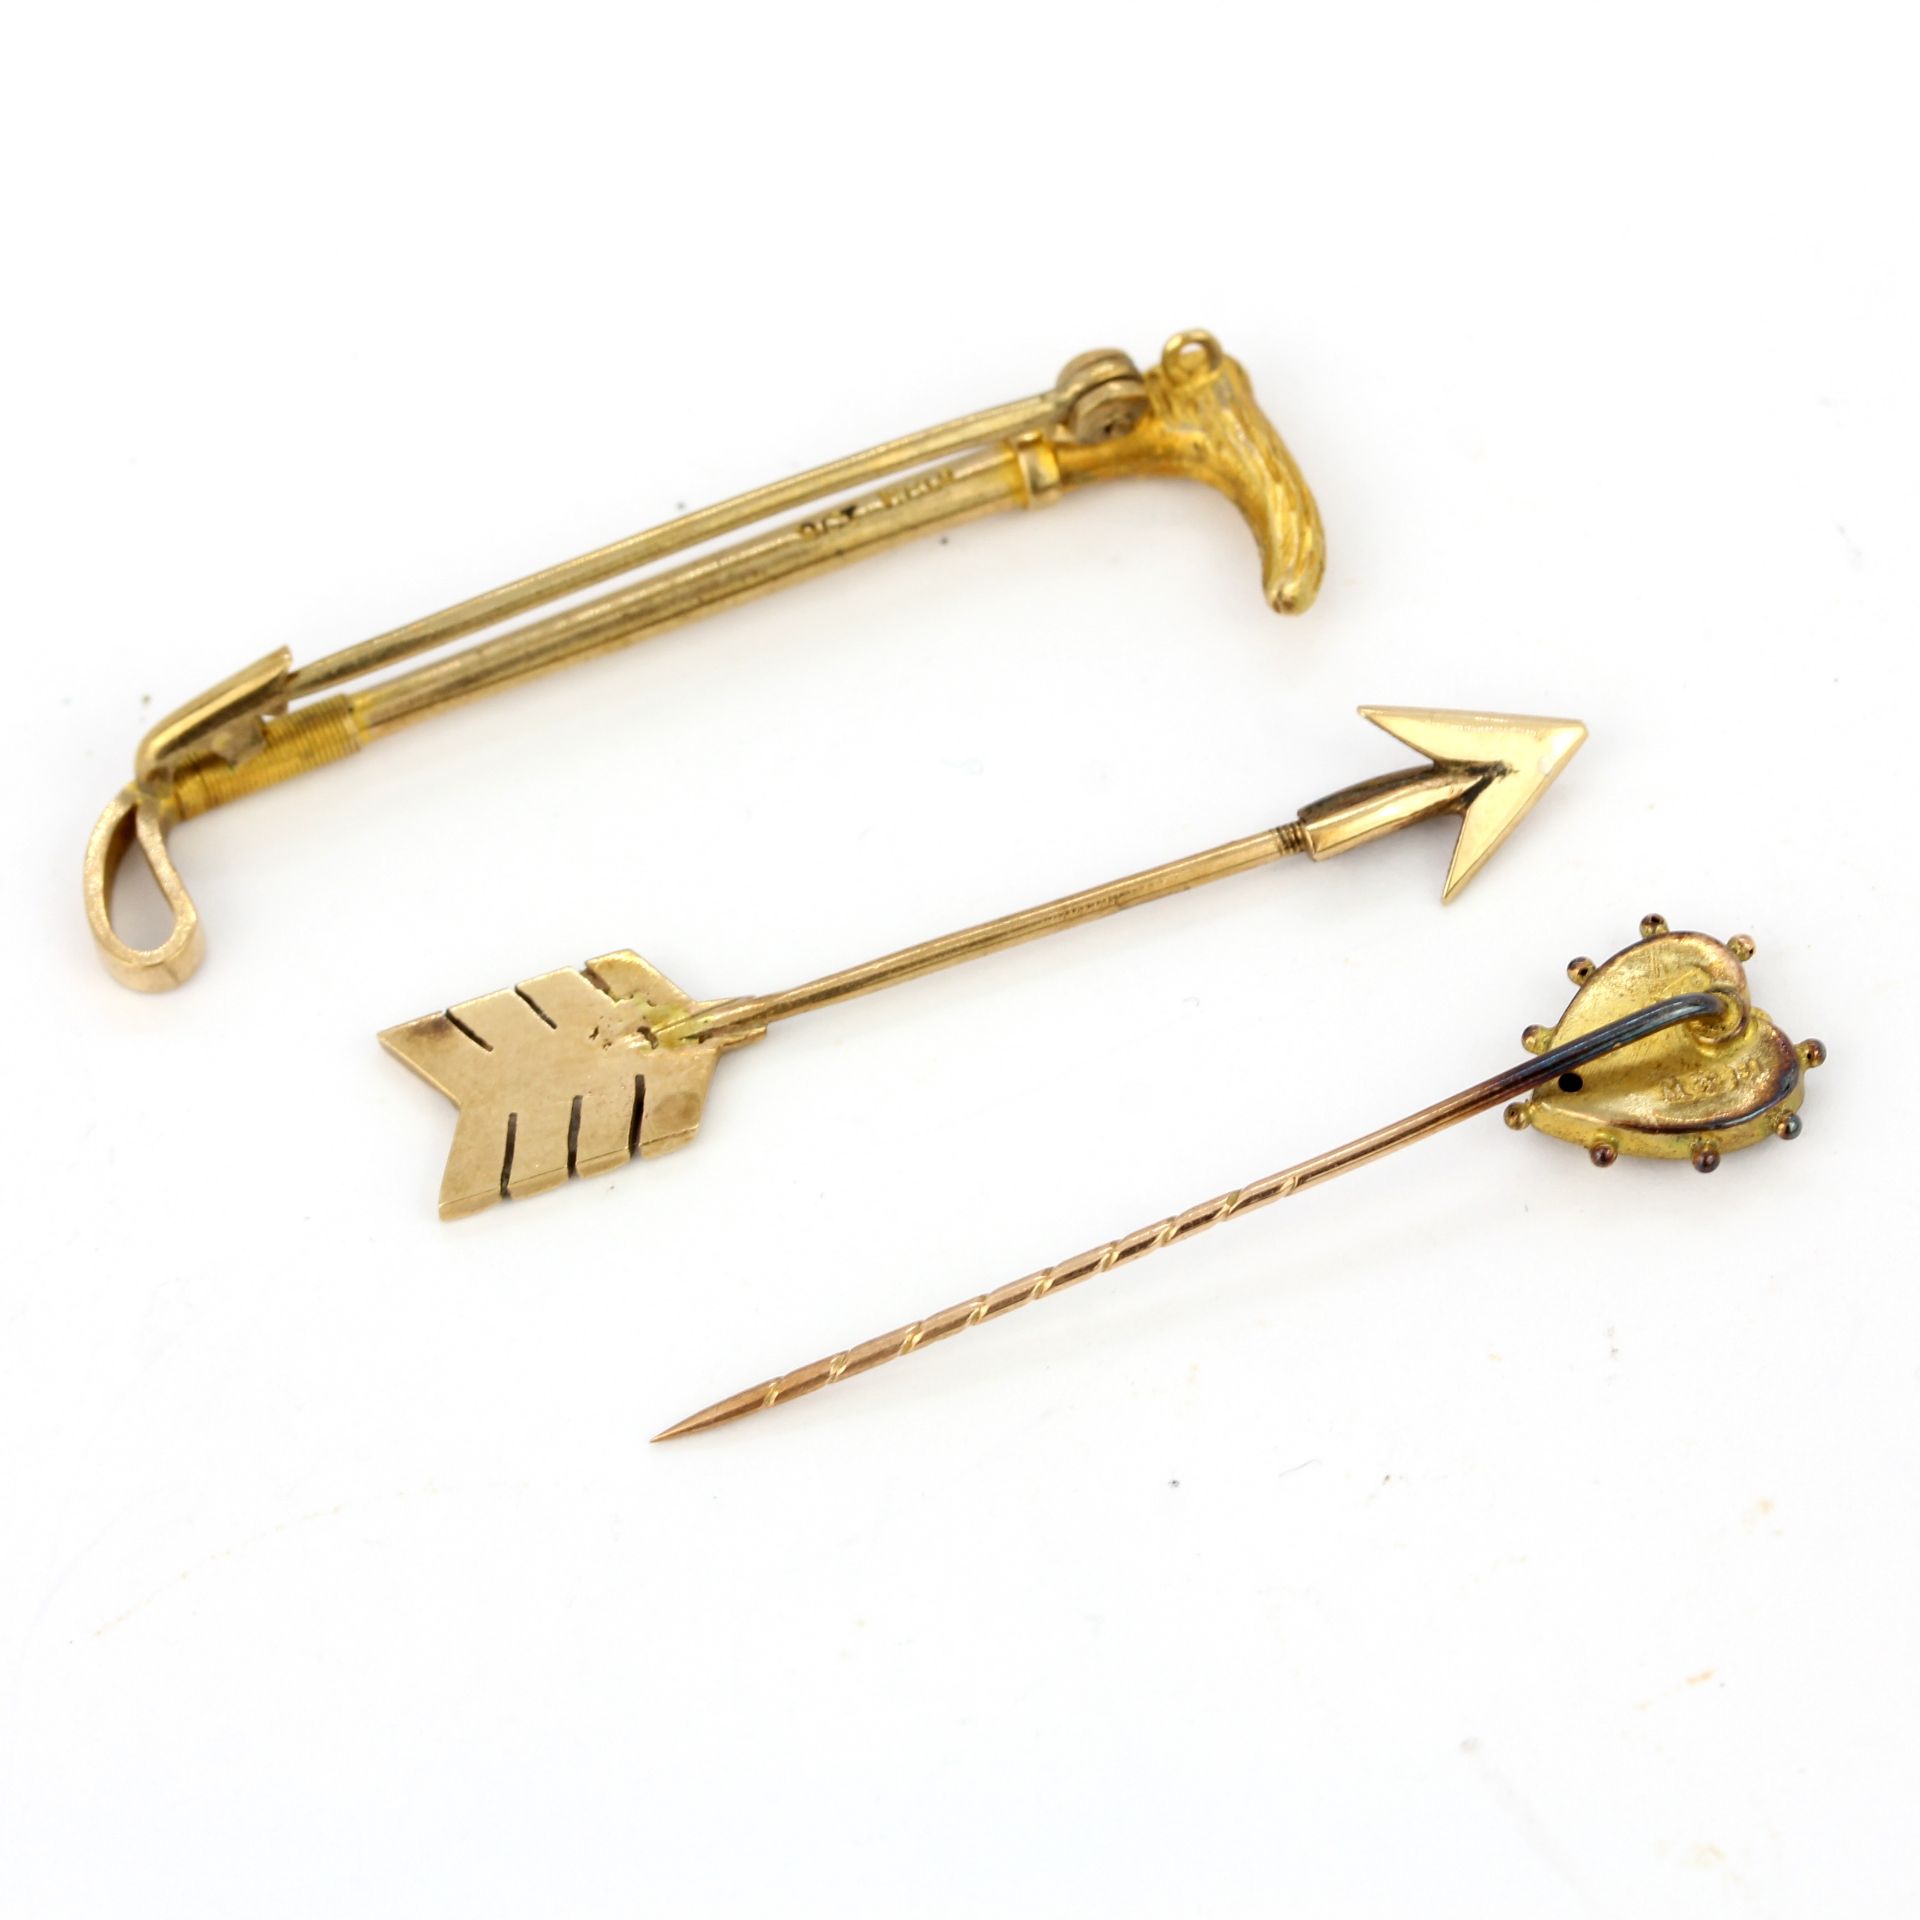 A 9ct yellow gold brooch together with two 9ct gold tie pins, L. 4.5 and 4cm. - Image 2 of 2